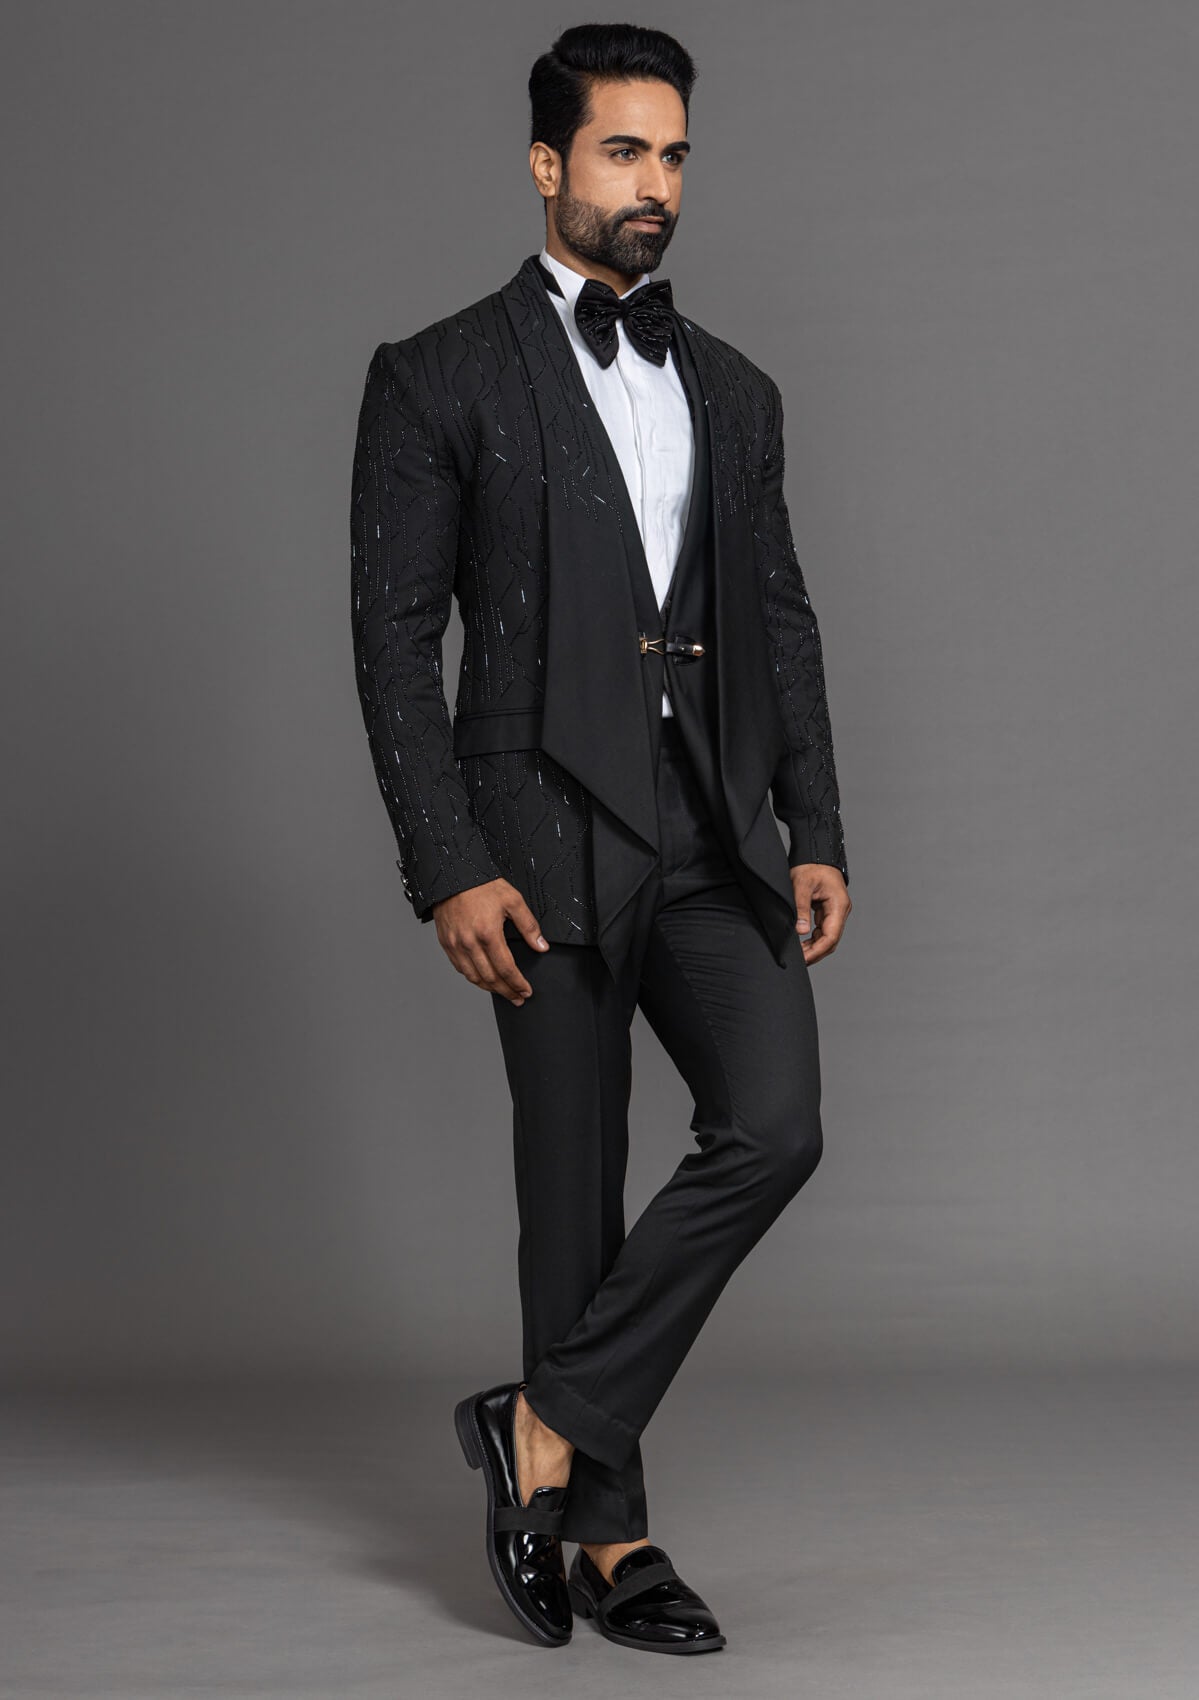 Suit for a sophisticated and vintage-inspired look